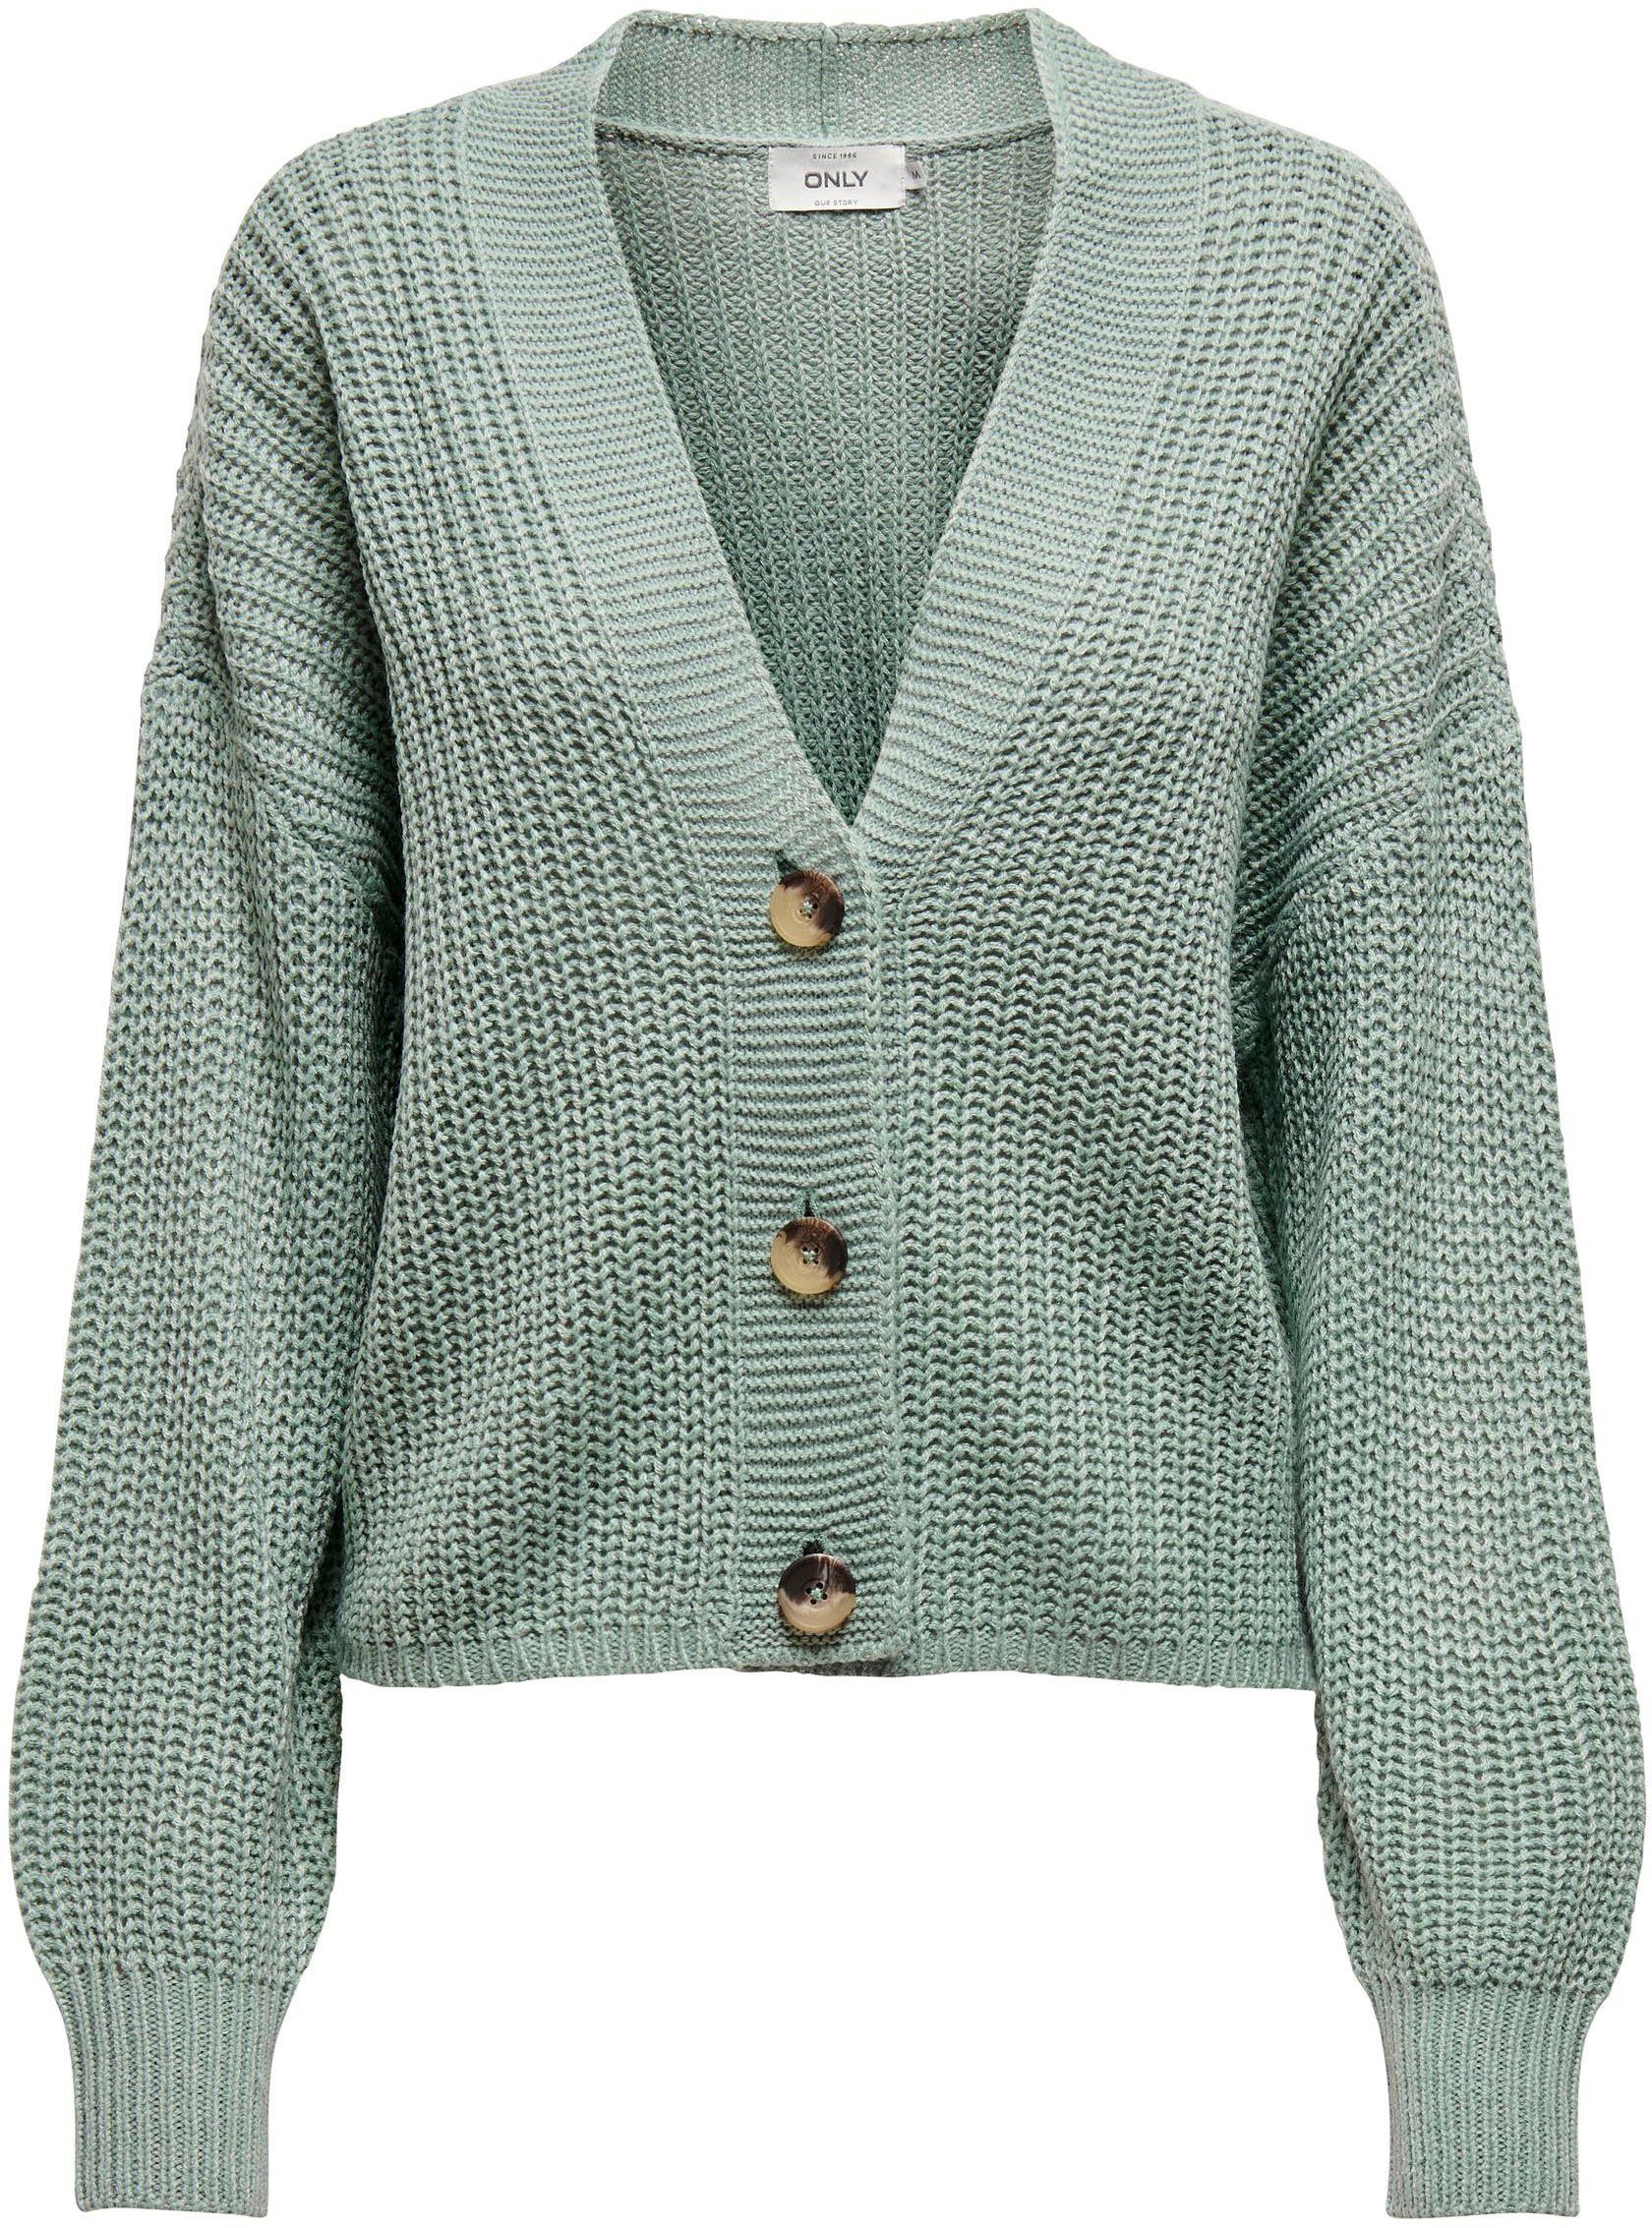 NOOS green CARDIGAN L/S KNT ONLY ONLCAROL NICE Strickjacke chinois